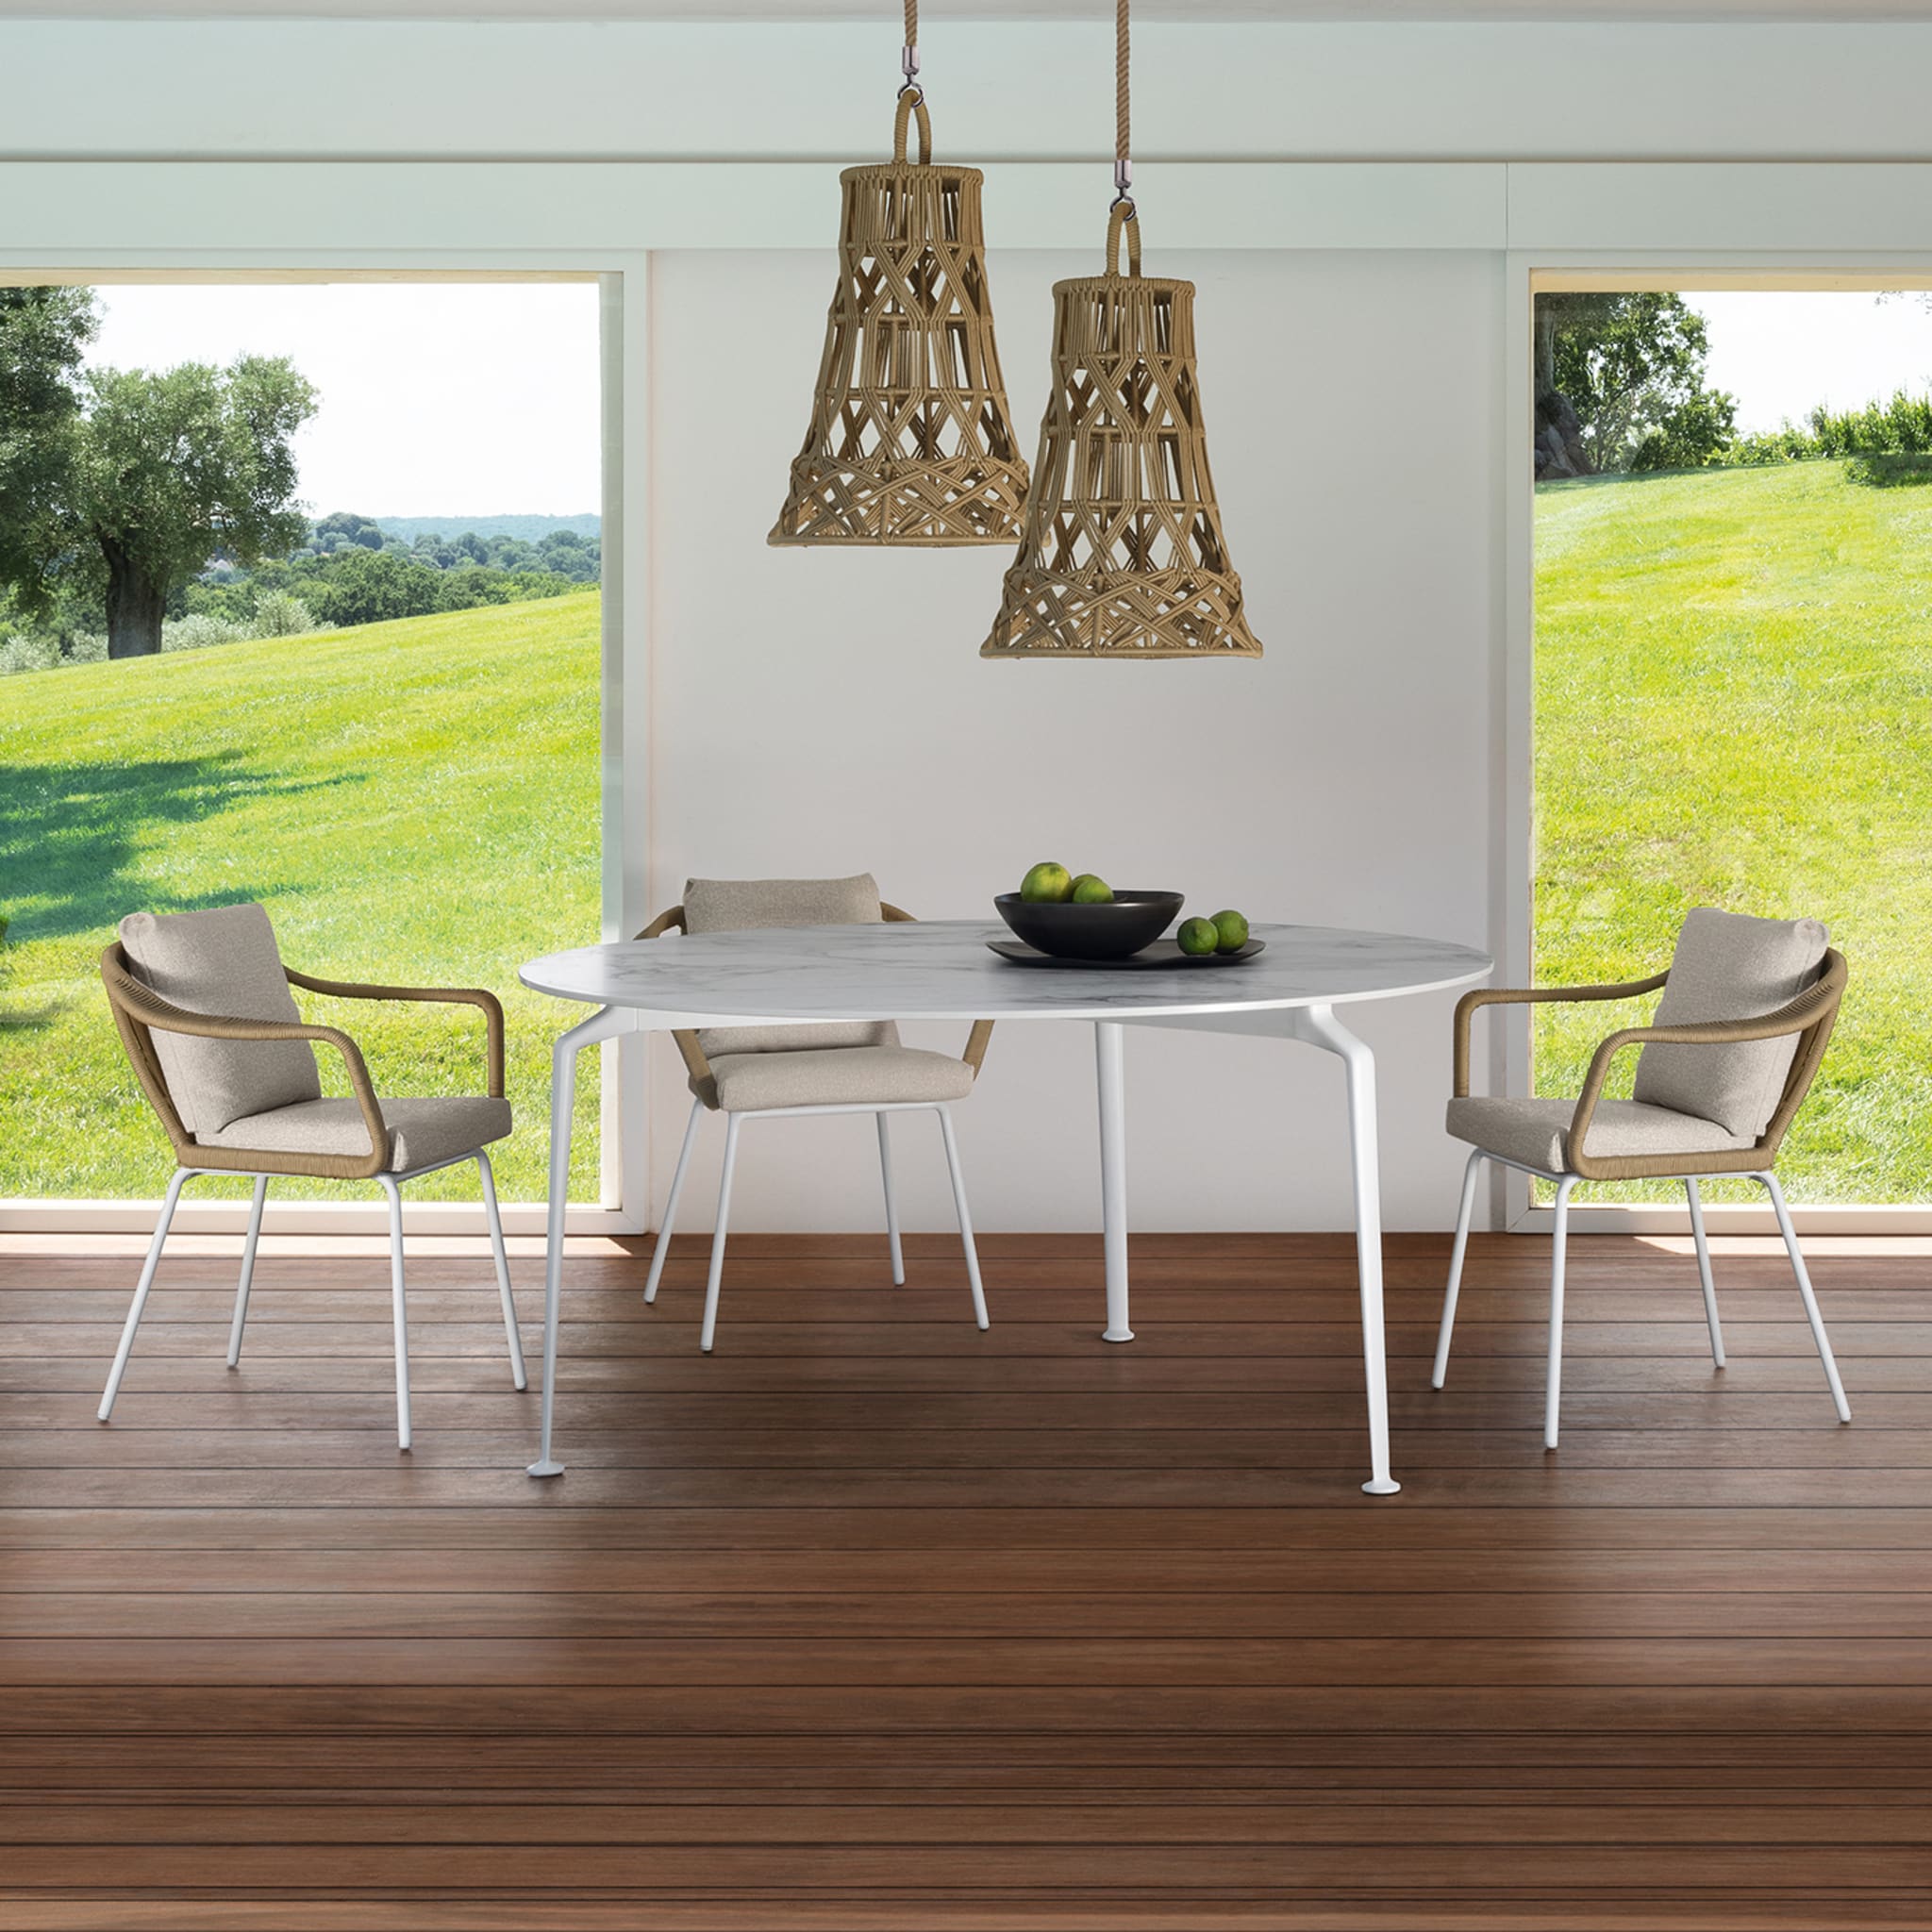 Cruise Alu White Dining Table by Ludovica & Roberto Palomba - Alternative view 3